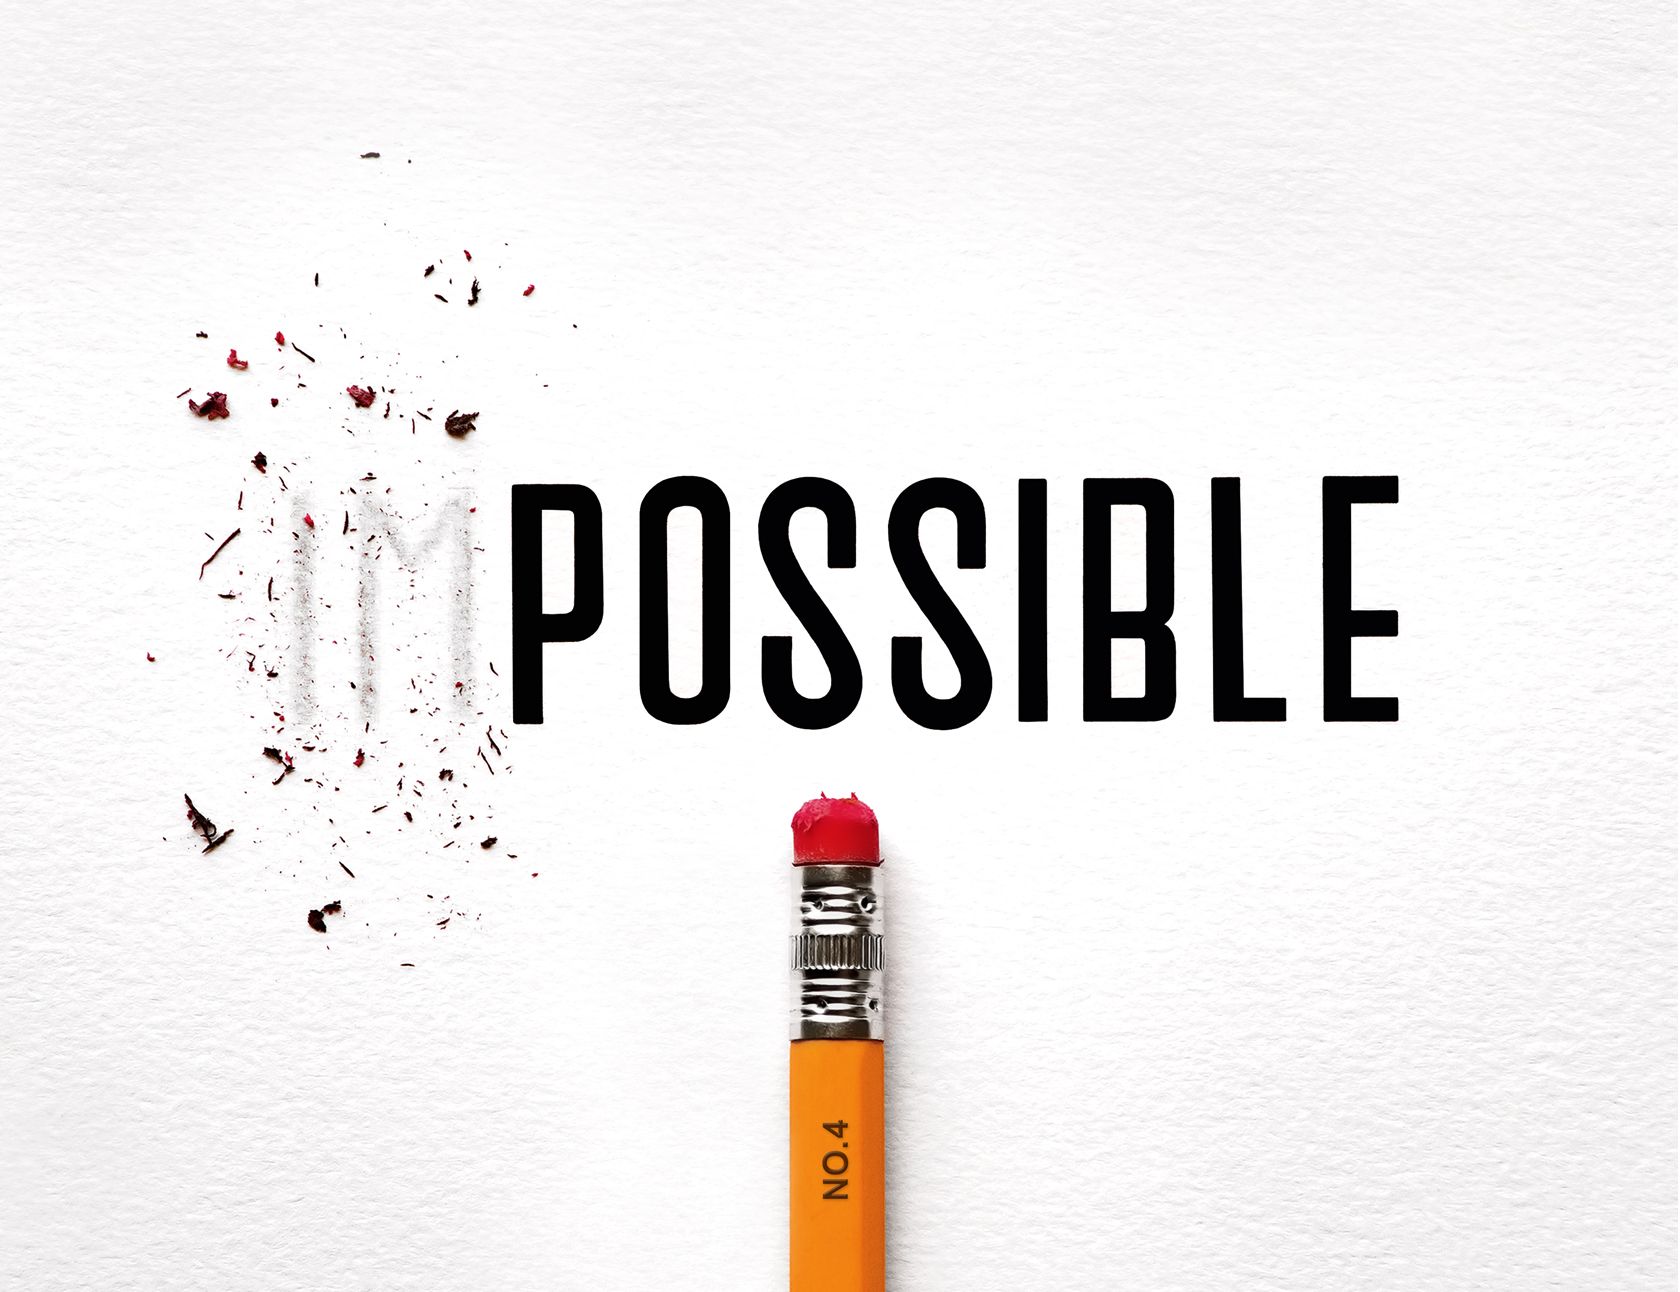 Impossible possible. Impossible картинки. Impossible is possible. Possible картинка. Картинка Impossible possible.